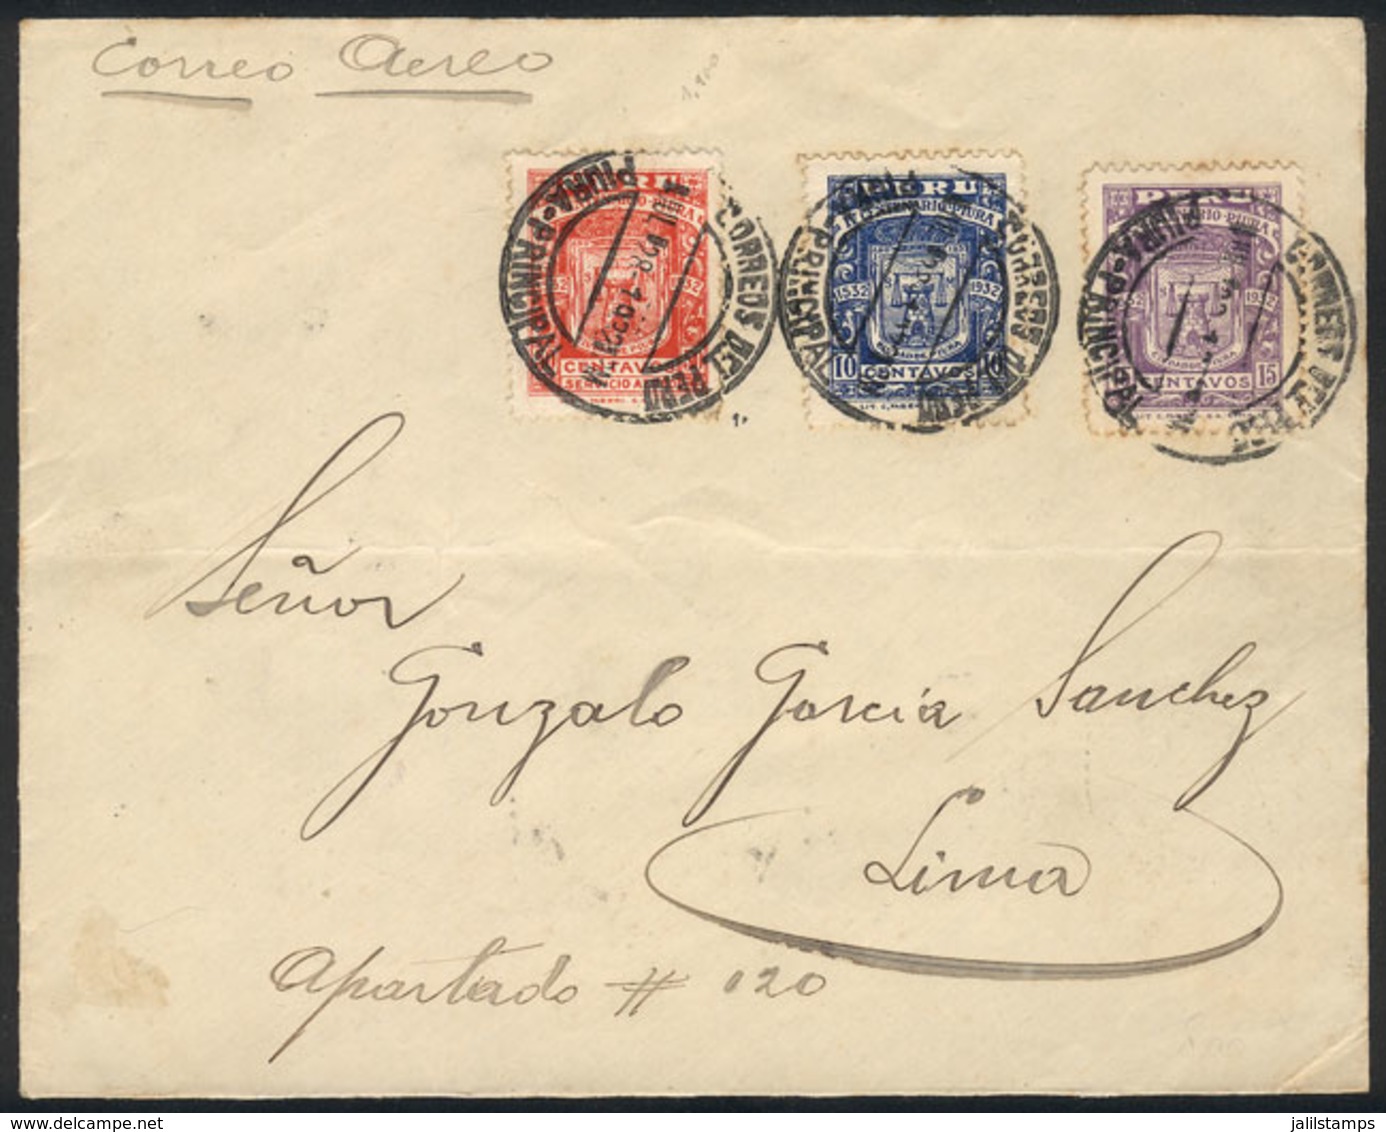 PERU: 28/JUL/1932 Piura - Lima, Front Of Airmail Cover Franked With The Set "Piura 400 Years" (Sc.300/1 + C3), With FIRS - Peru